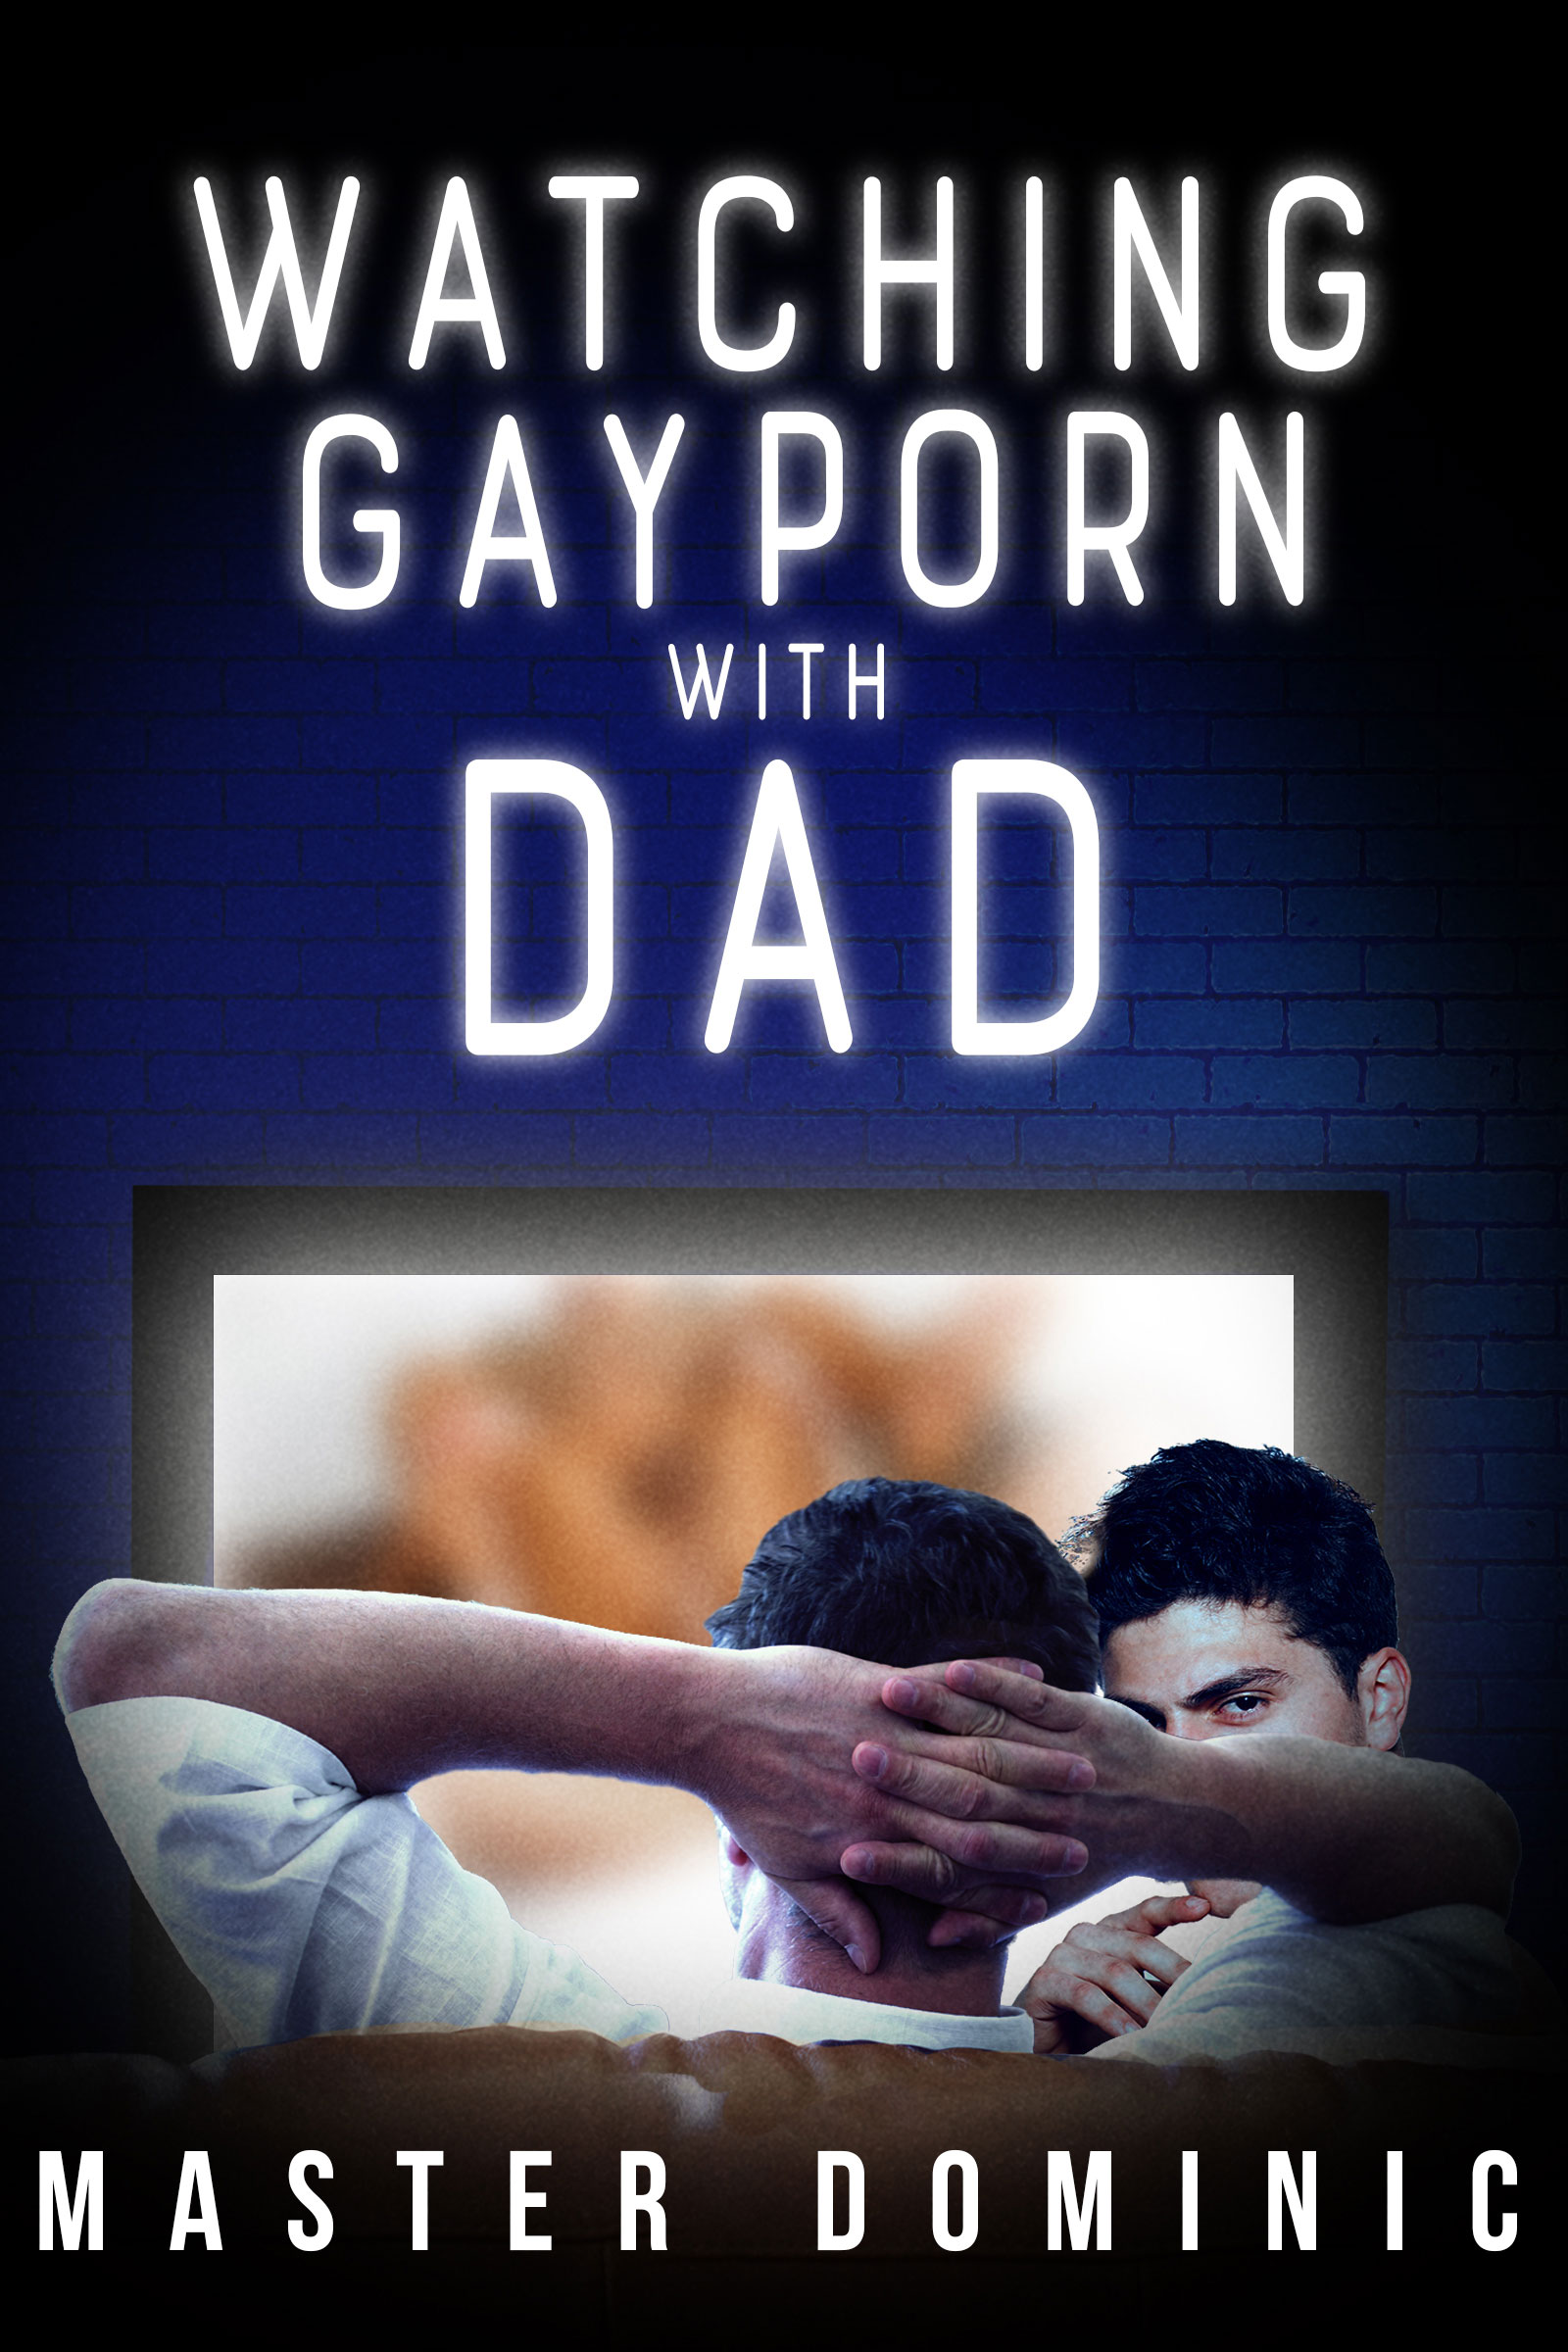 Watching Gay Porn With My Dad, an Ebook by Master Dominic